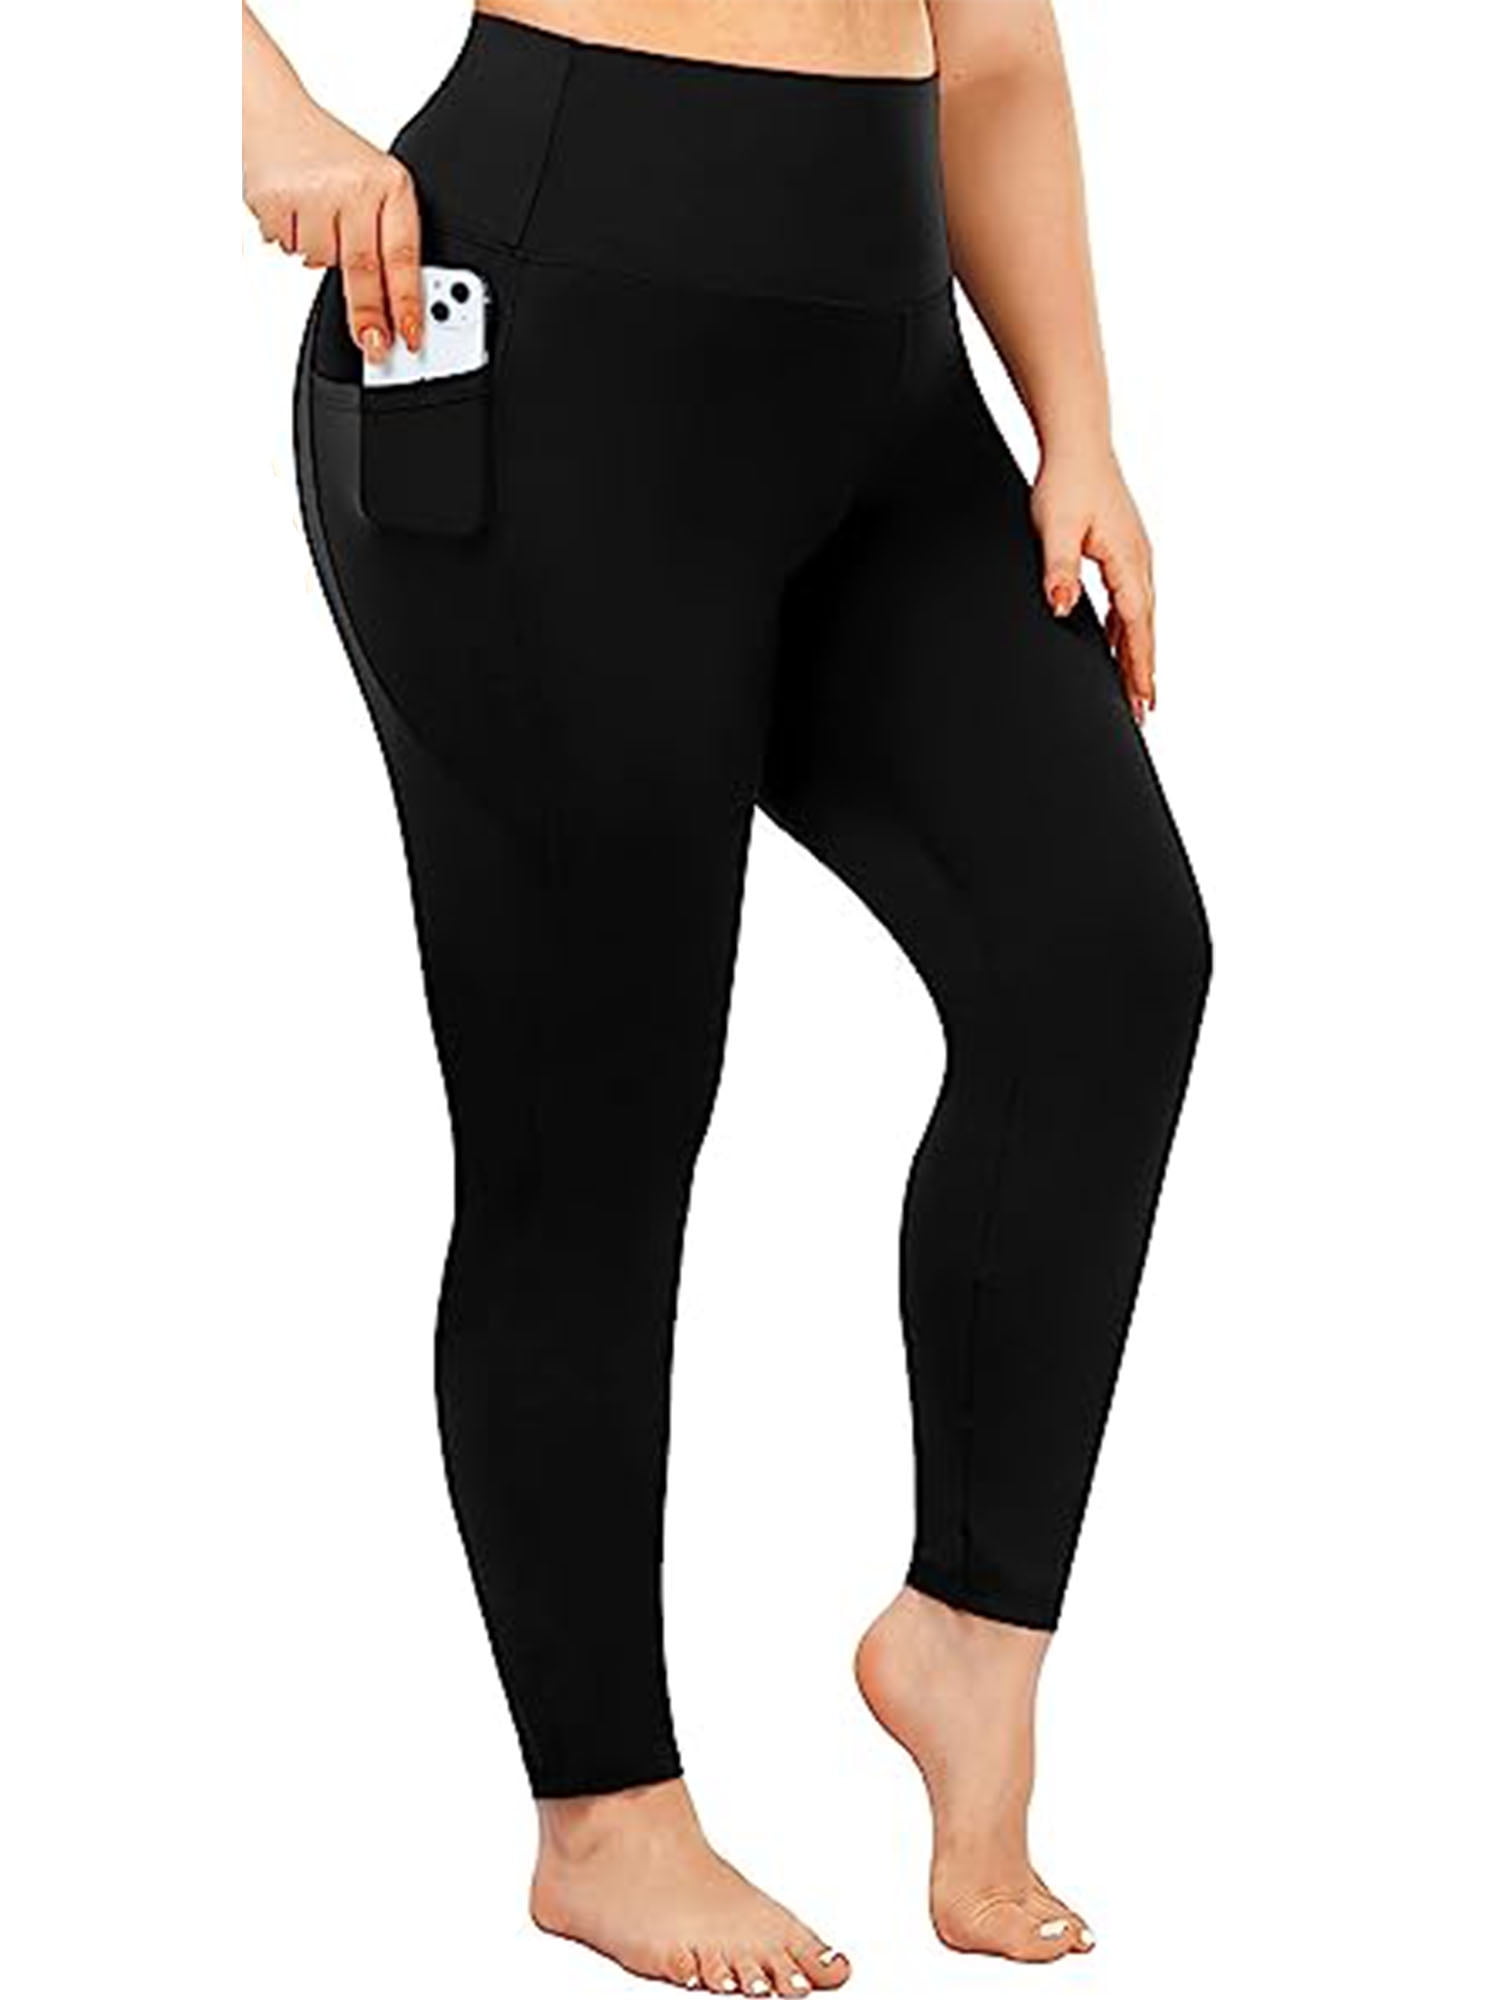 Womens Bootcut Yoga Pants with Pockets Plus Size Stretch Yoga Workout Pants  Leggings High Waist Bootleg Gym Fitness Trousers for Grils 